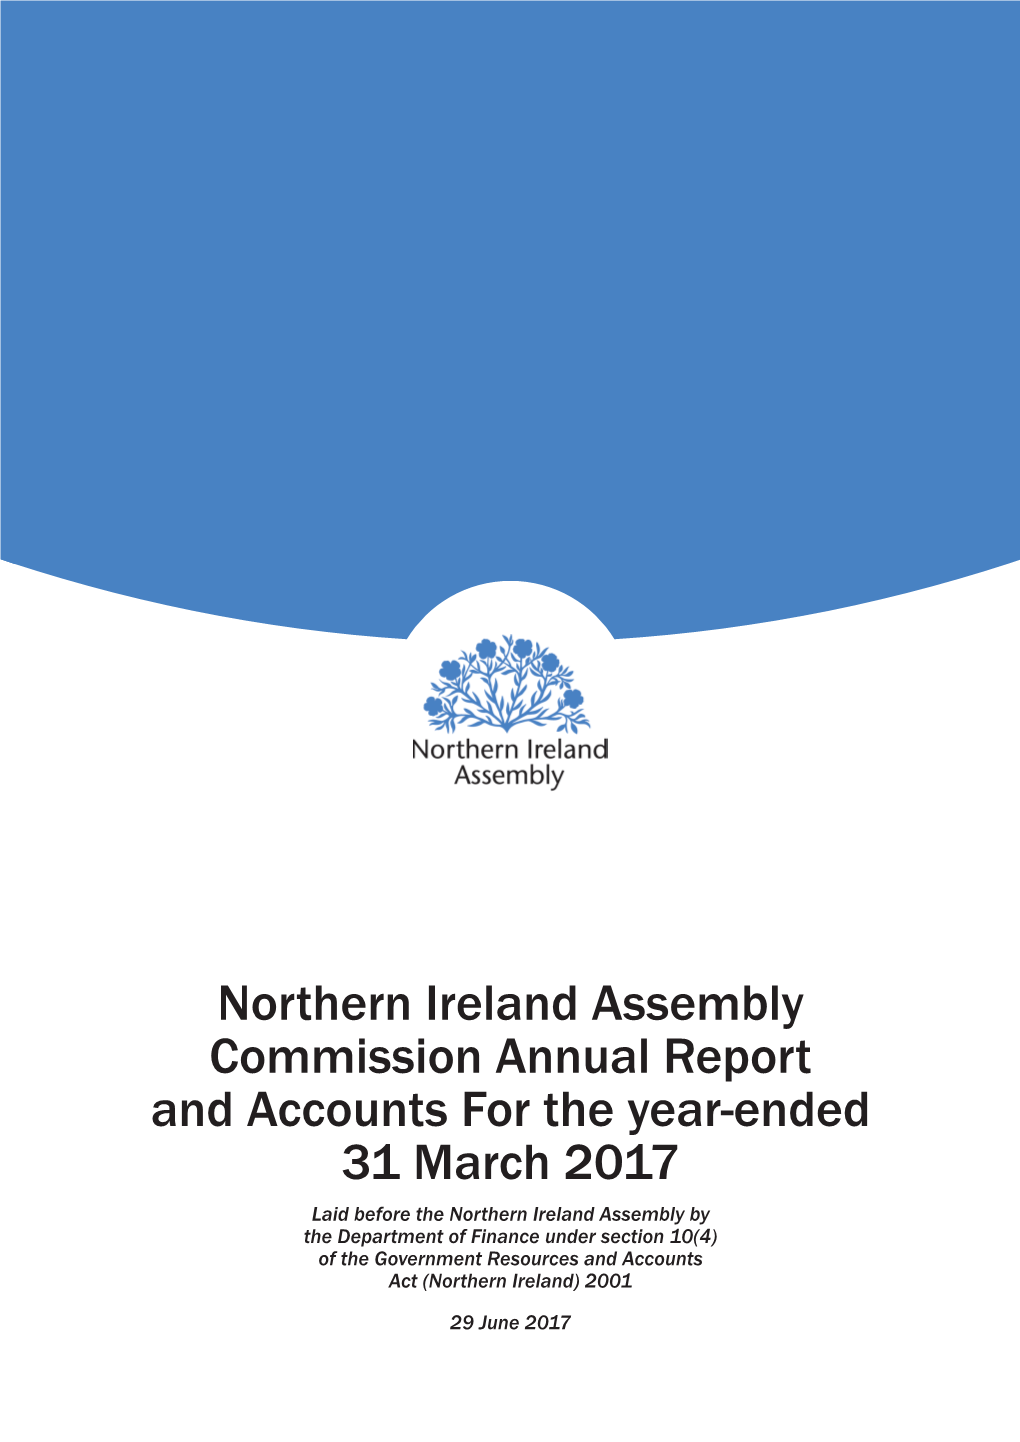 Northern Ireland Assembly Commission Annual Report and Accounts for the Year-Ended 31 March 2017